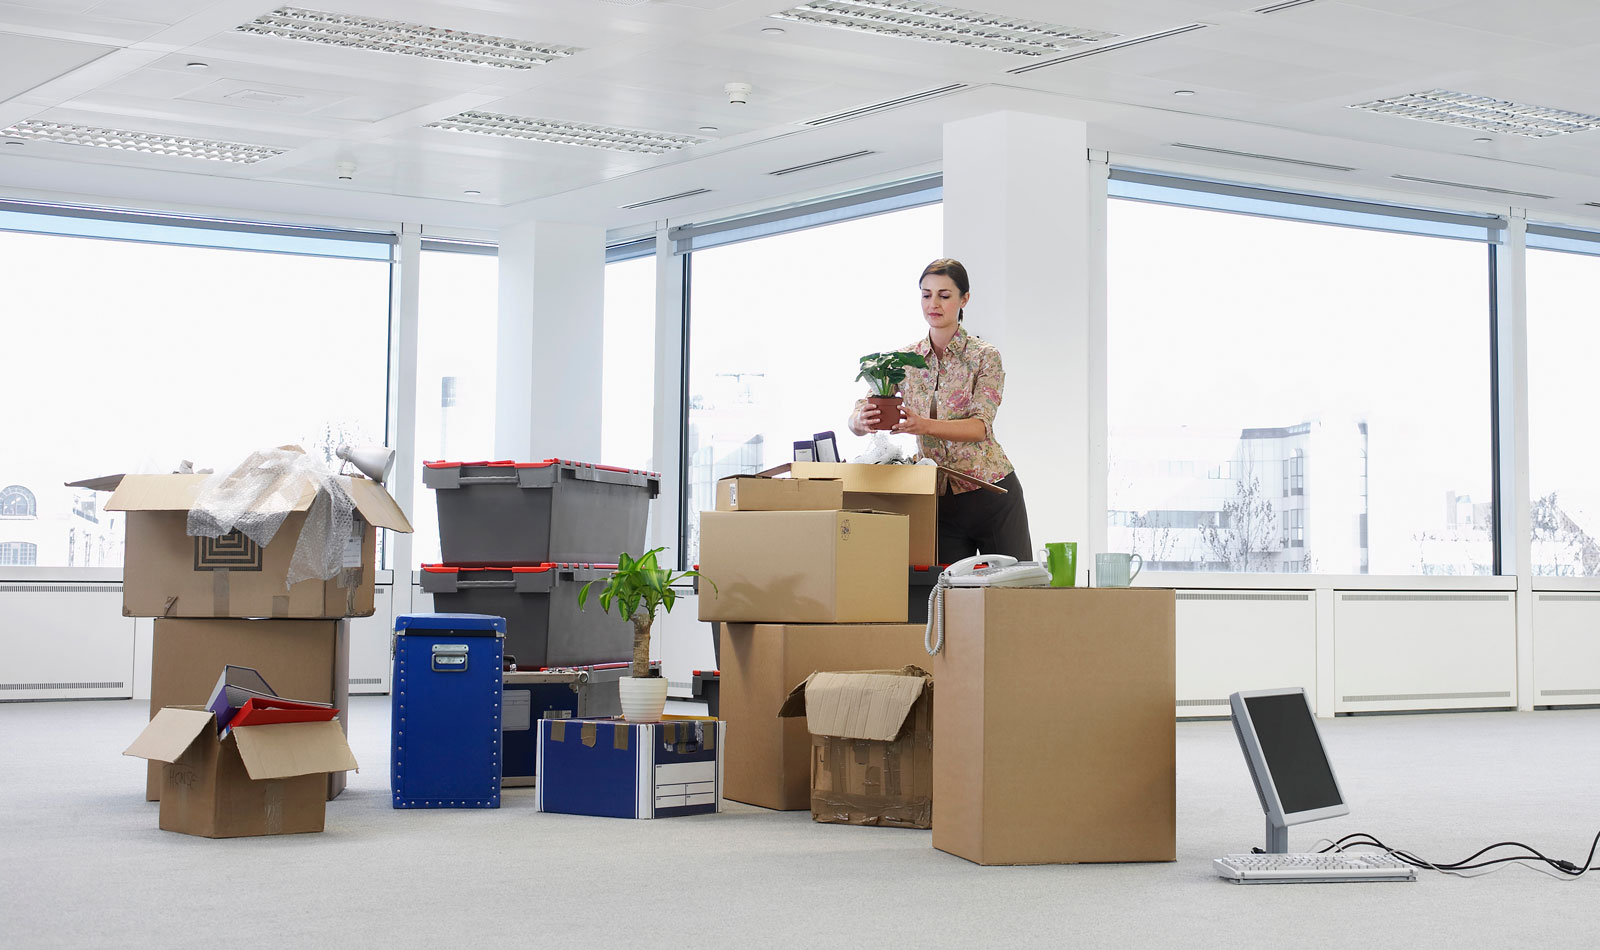 Young businesswoman holding potted plant near cartons and equipment in empty office space